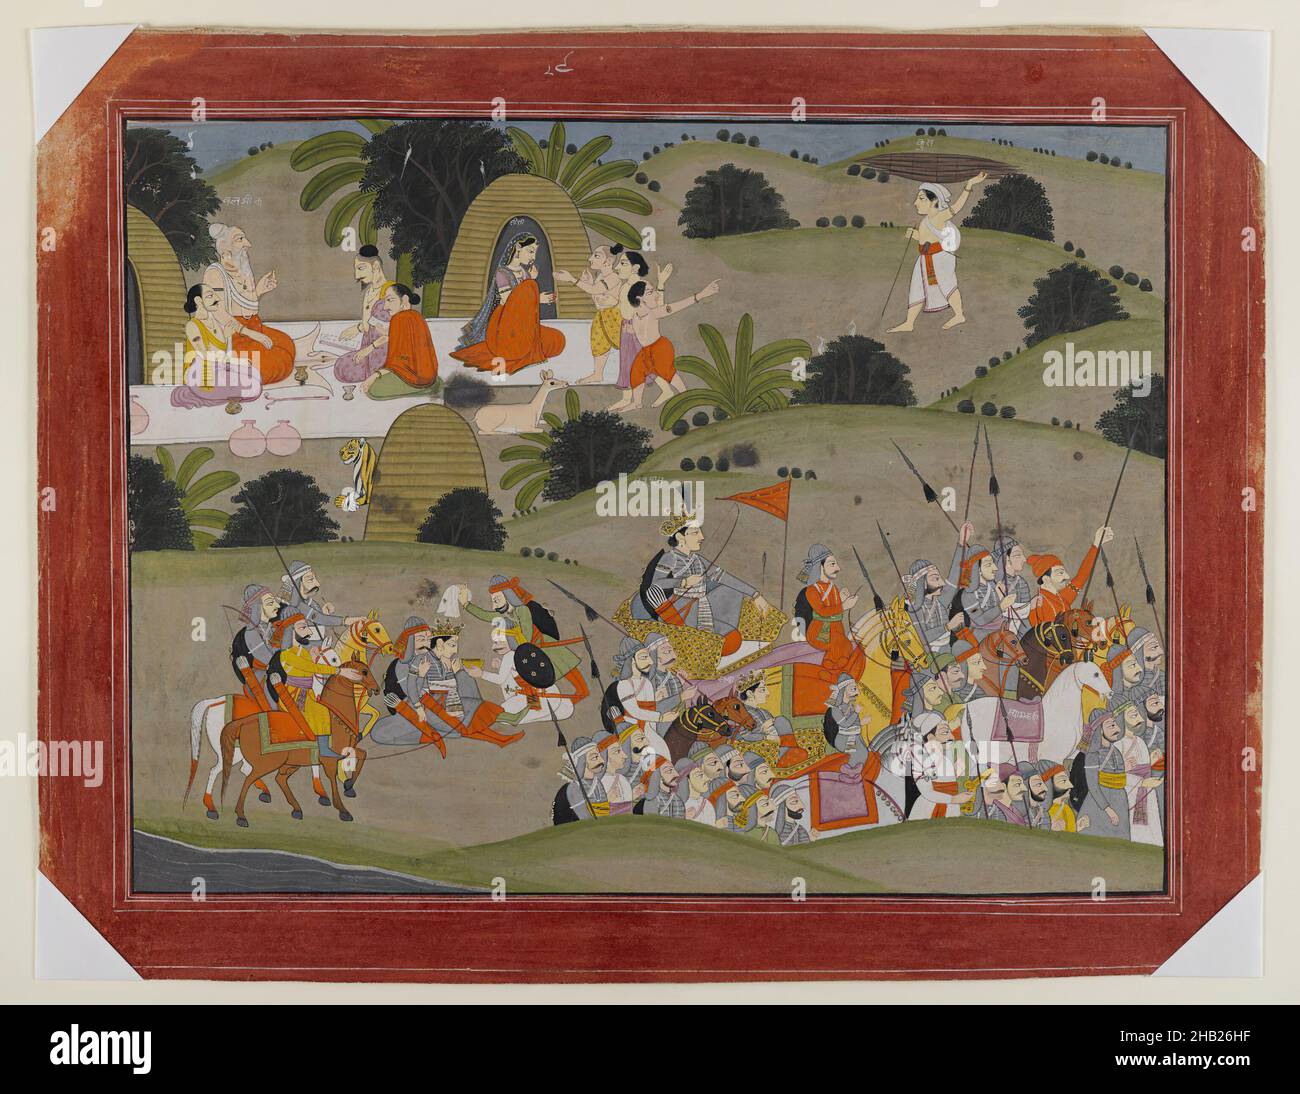 Battle between Lava and Rama's brother, Shatrughna, near the hermitage of Valmiki, Page from a Dispersed Ramayana Series, Indian, Opaque watercolor and gold on paper, Punjab Hills, India, ca. 1820, sheet: 13 1/4 x 17 1/4 in., 33.7 x 43.8 cm, Animals, Chariot, Eastern India, Gold, Horse, Kangra, Orissa, Paper, Punjab Hills, Ramayana, Rescue, Shyamakarna, Sita, Tiger, Watercolor Stock Photo